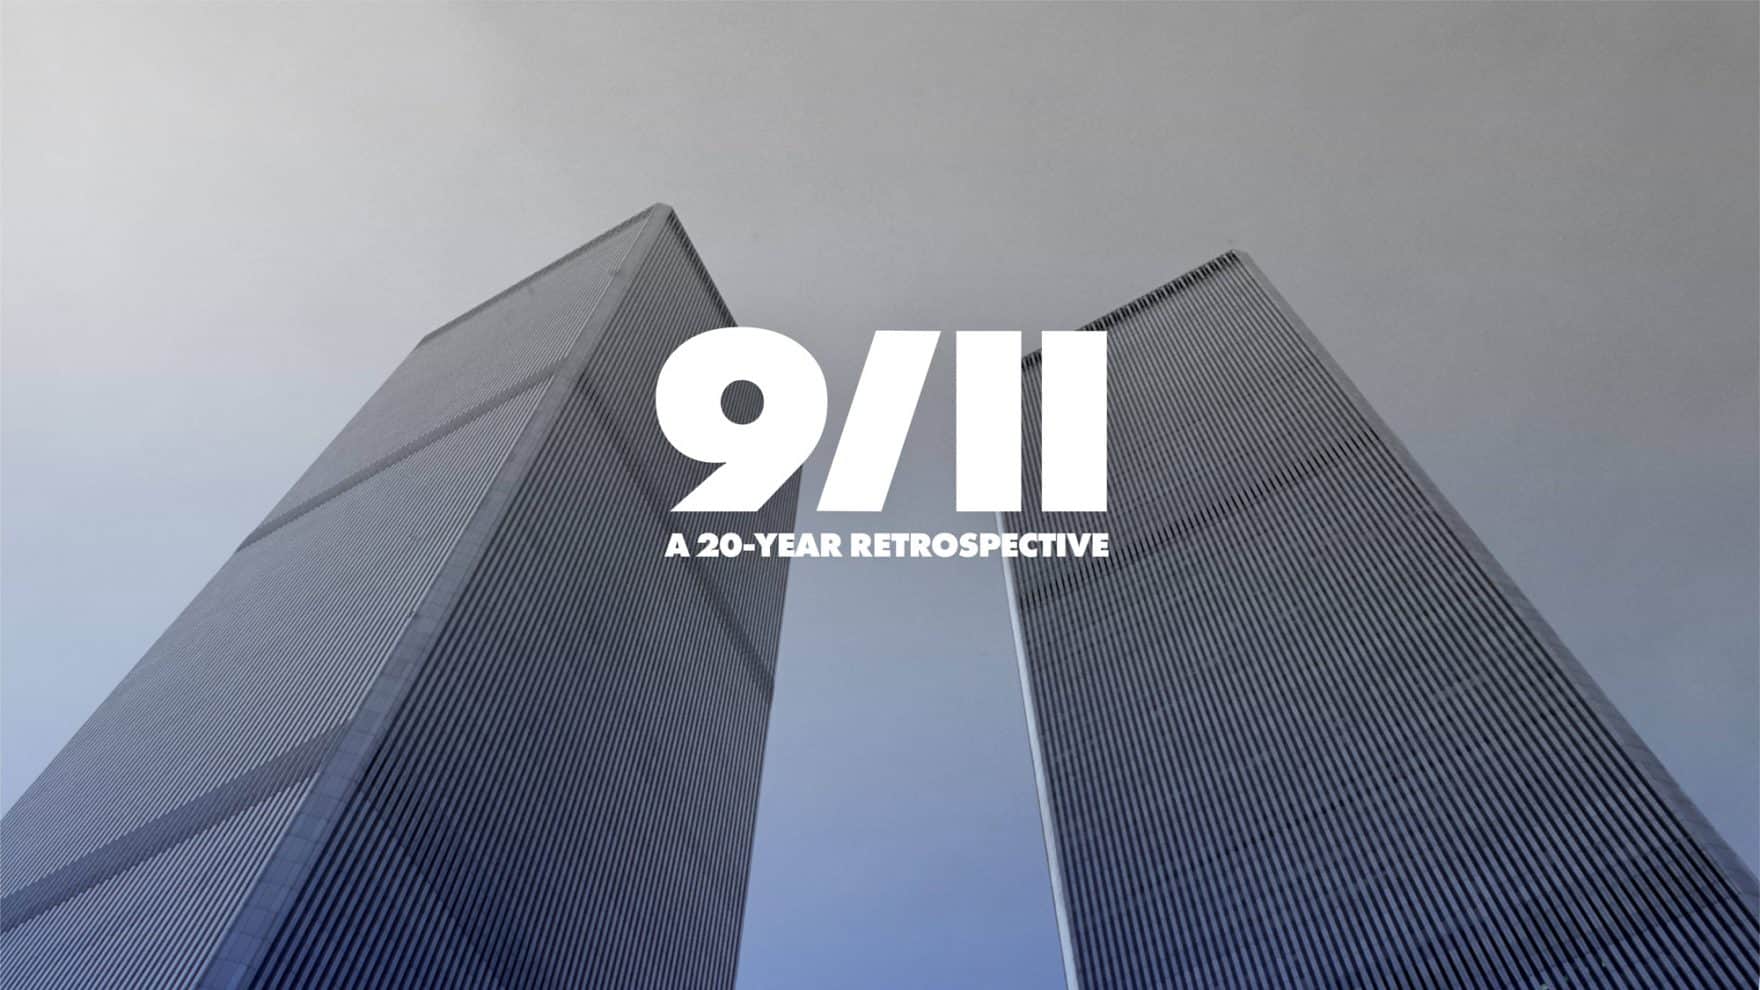 Regent University to Host Virtual Event to Commemorate the 20th Anniversary of 9/11